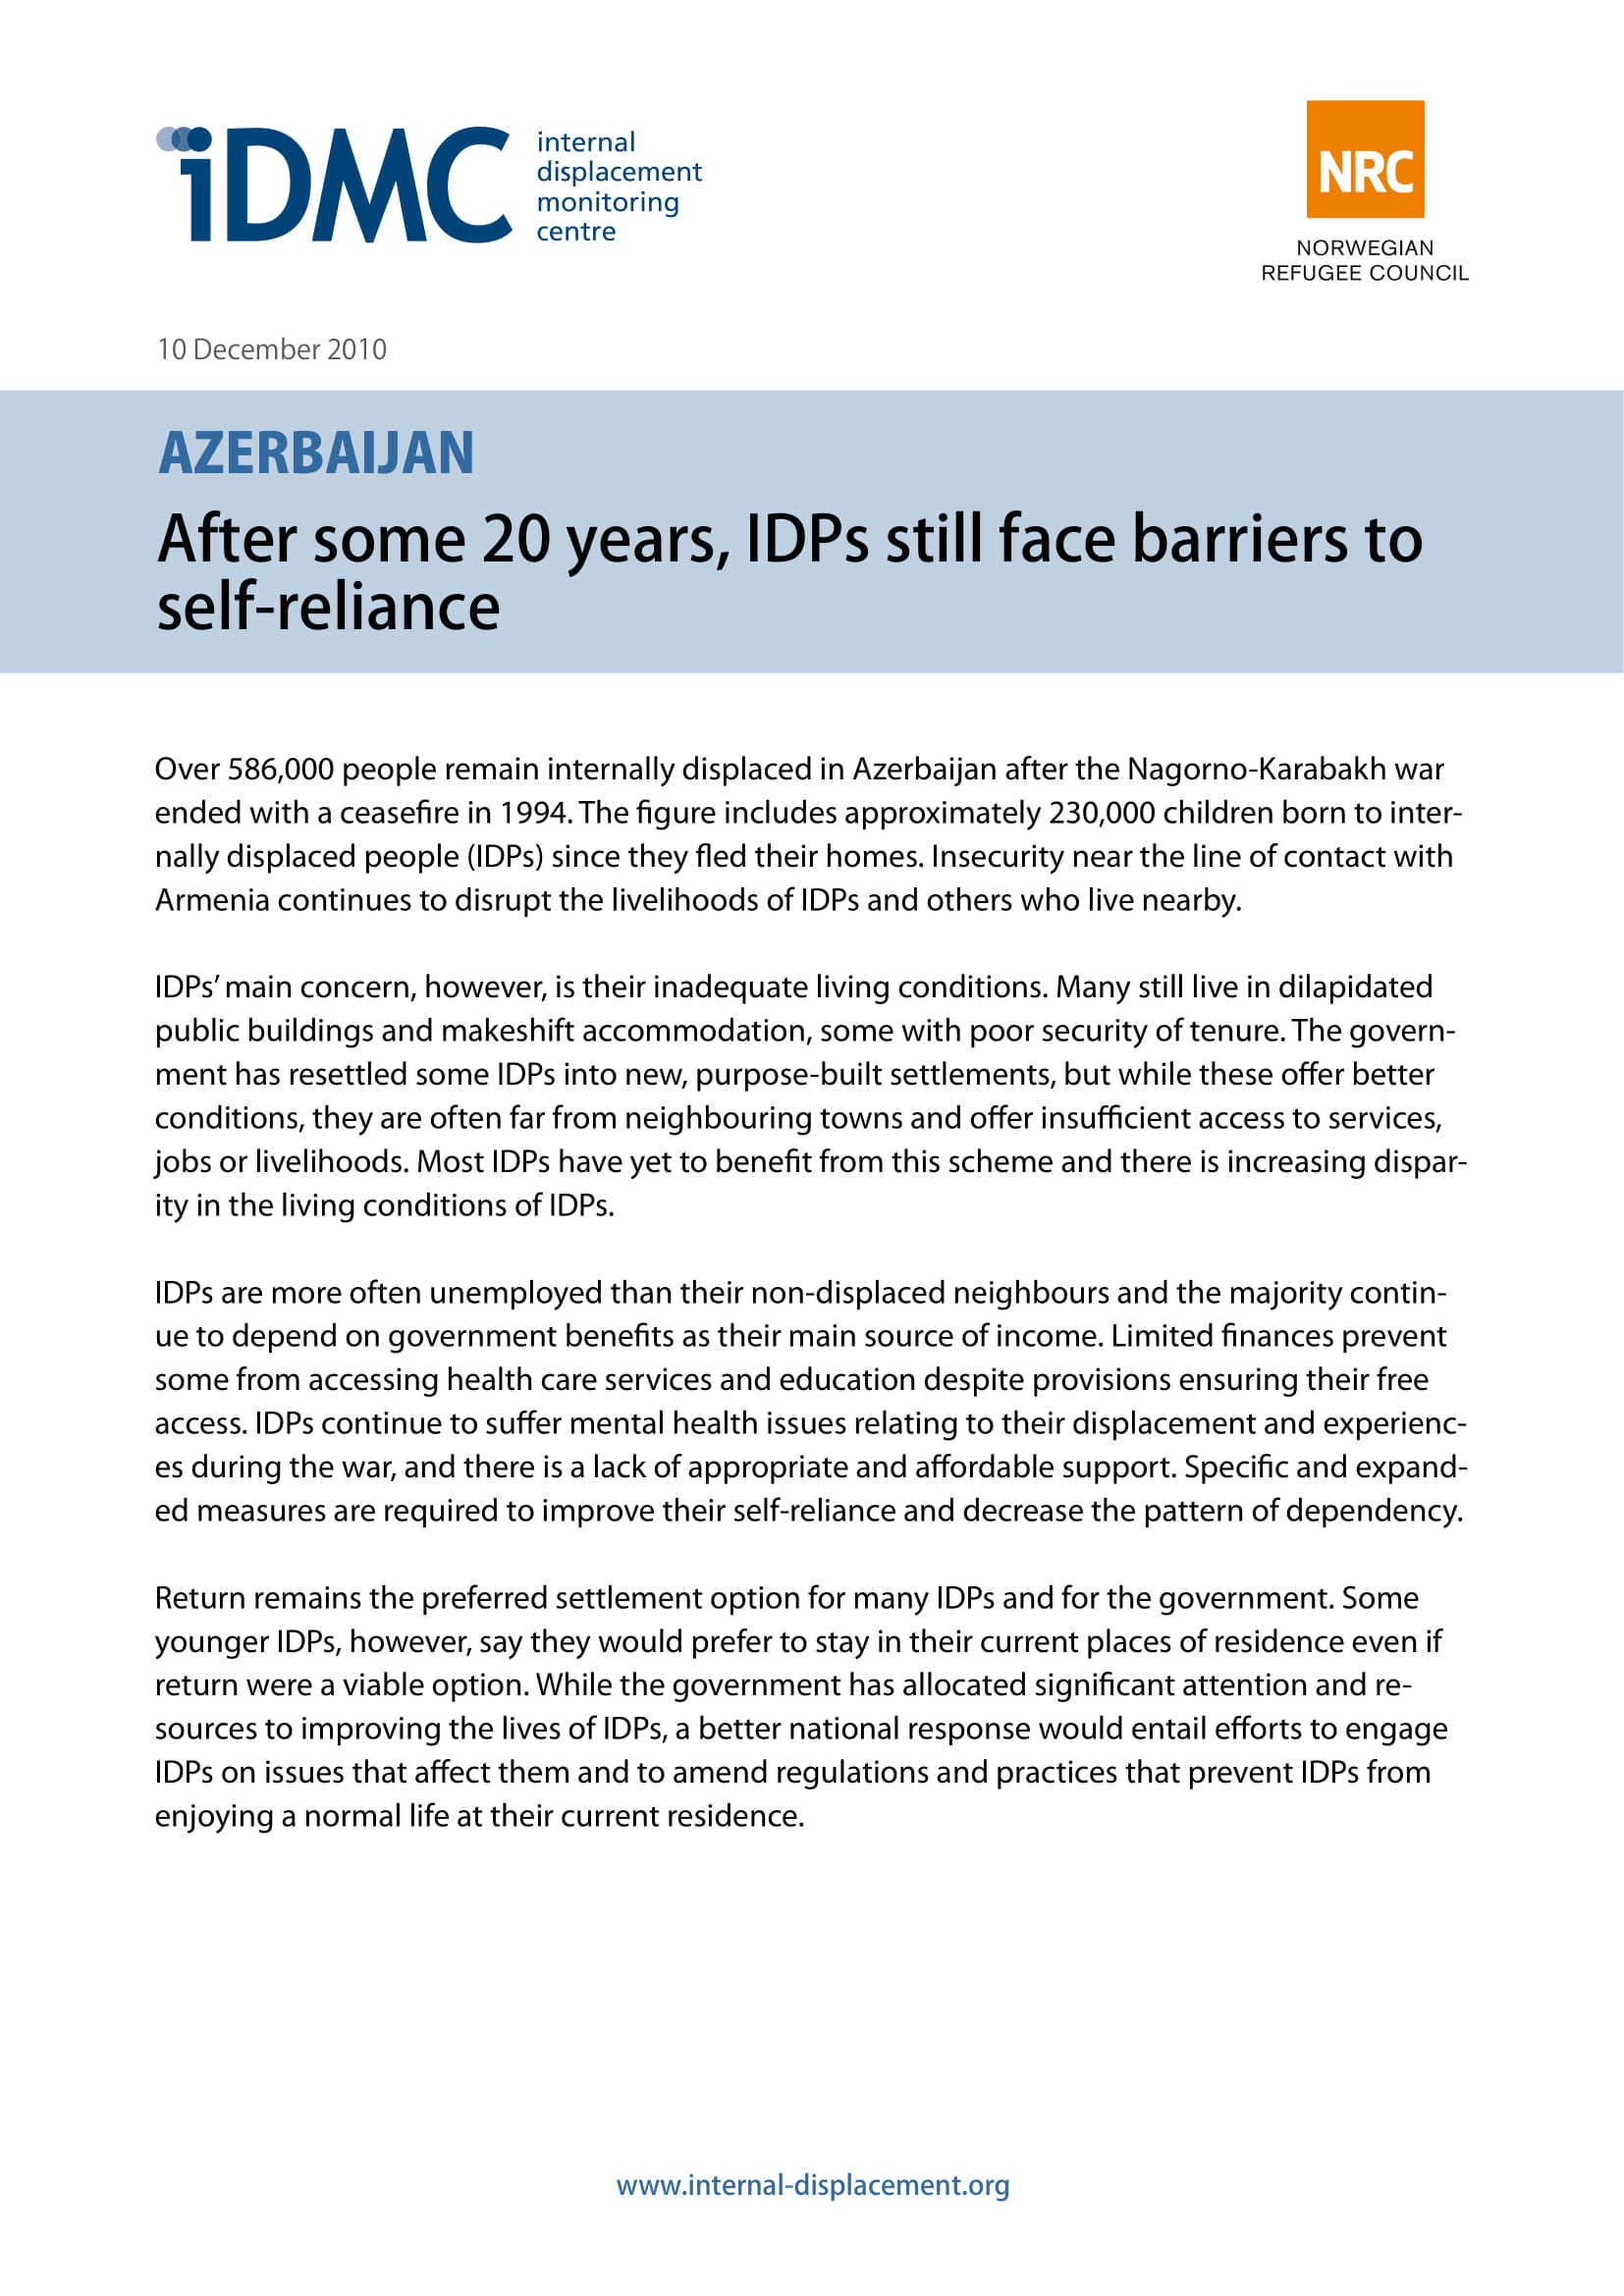 Azerbaijan: After some 20 years, IDPs still face barriers to self-reliance